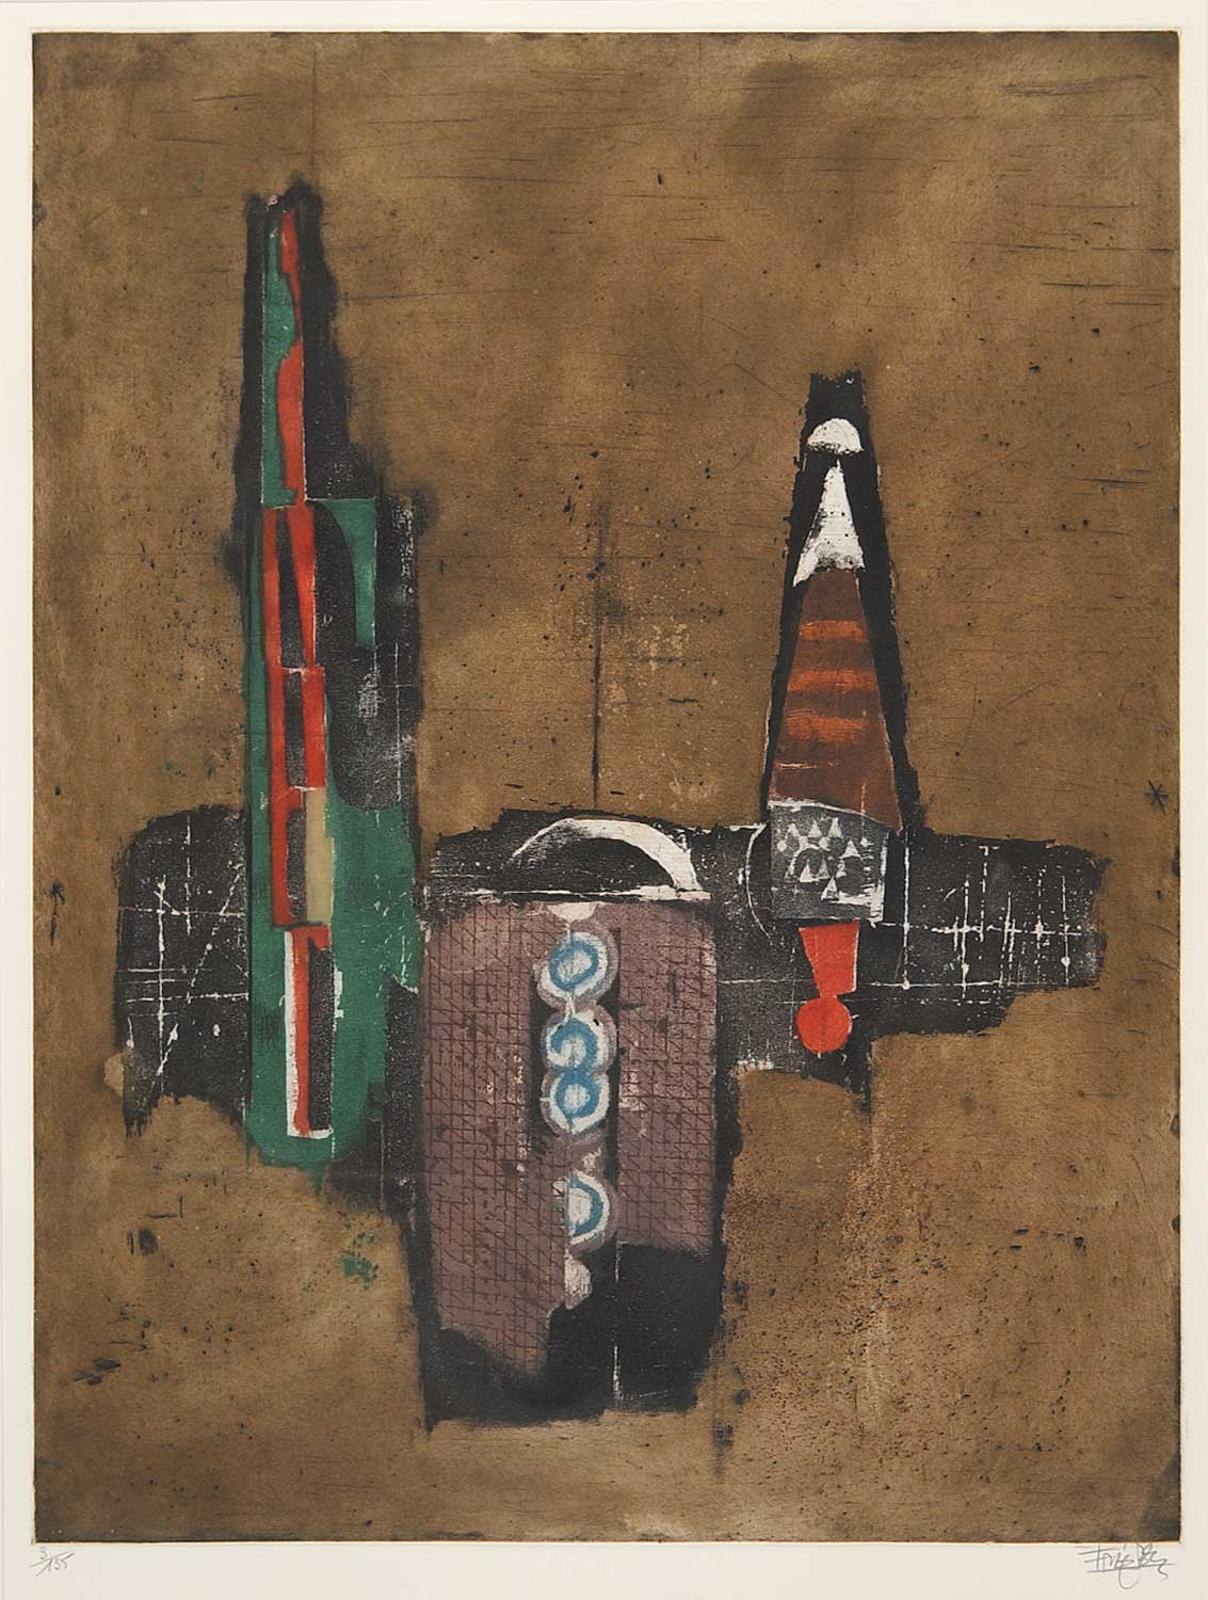 Johnny Friedlaender (1912-1992) - Untitled - Abstract in Brown, Green and Red  #3/35